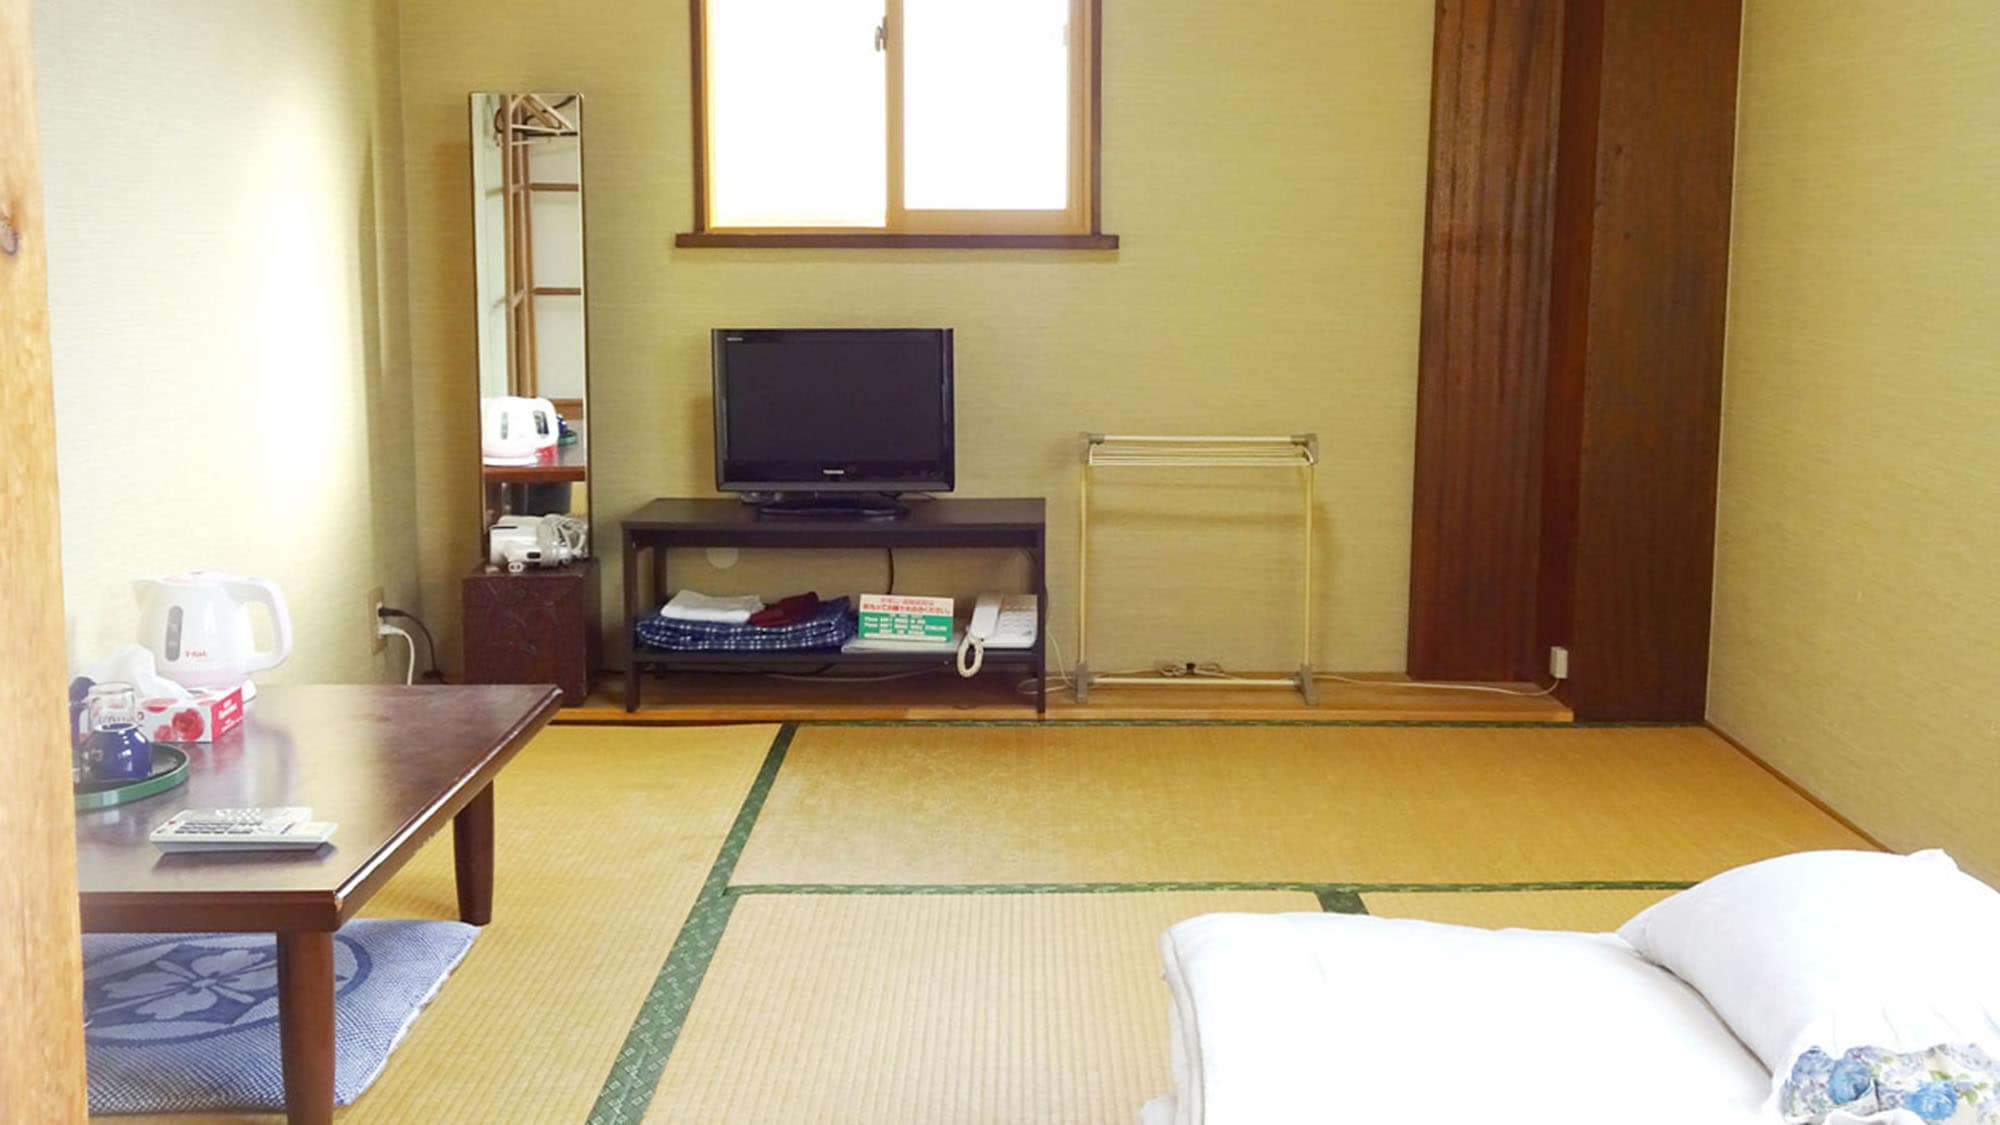 ・ [Example of Japanese-style room 4.5 tatami mats]: Compact yet easy-to-use room